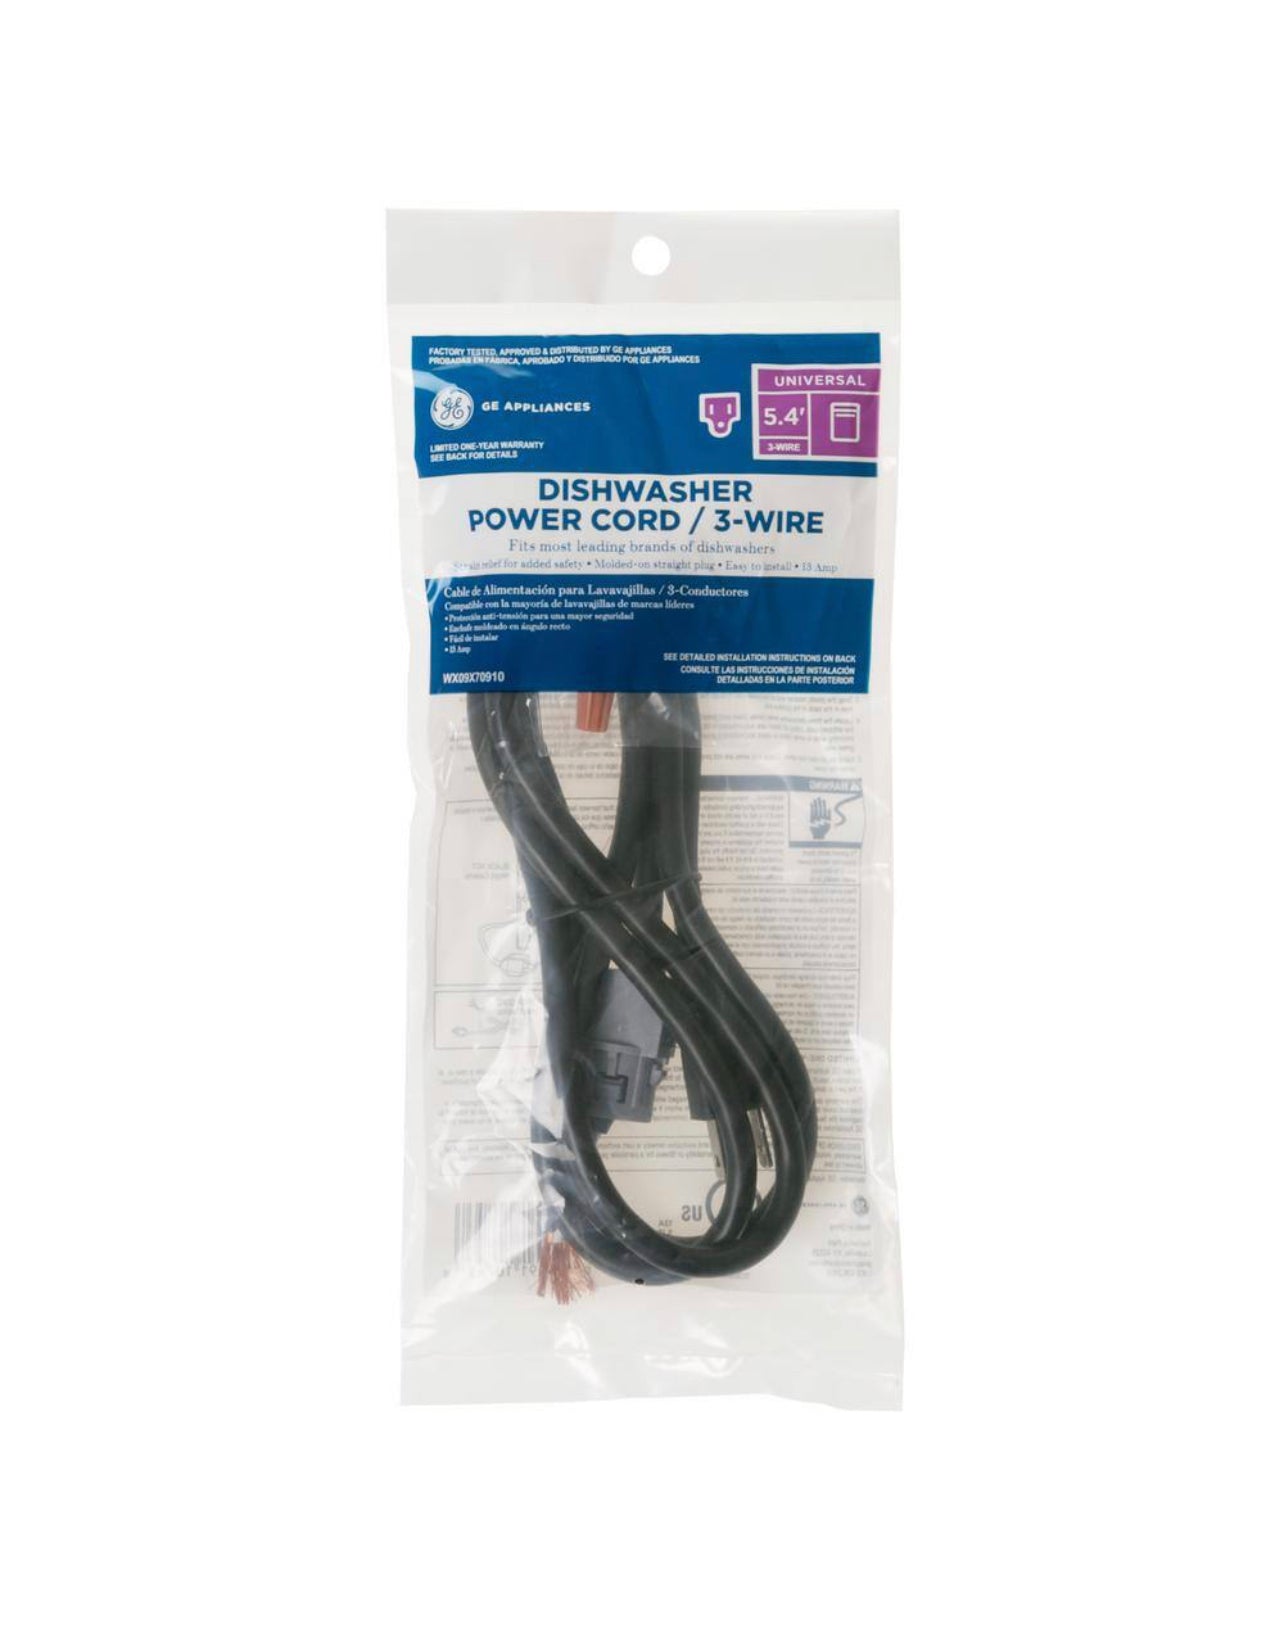 GE  5.4 ft. 3-Prong Cord for Built-In Dishwashers New